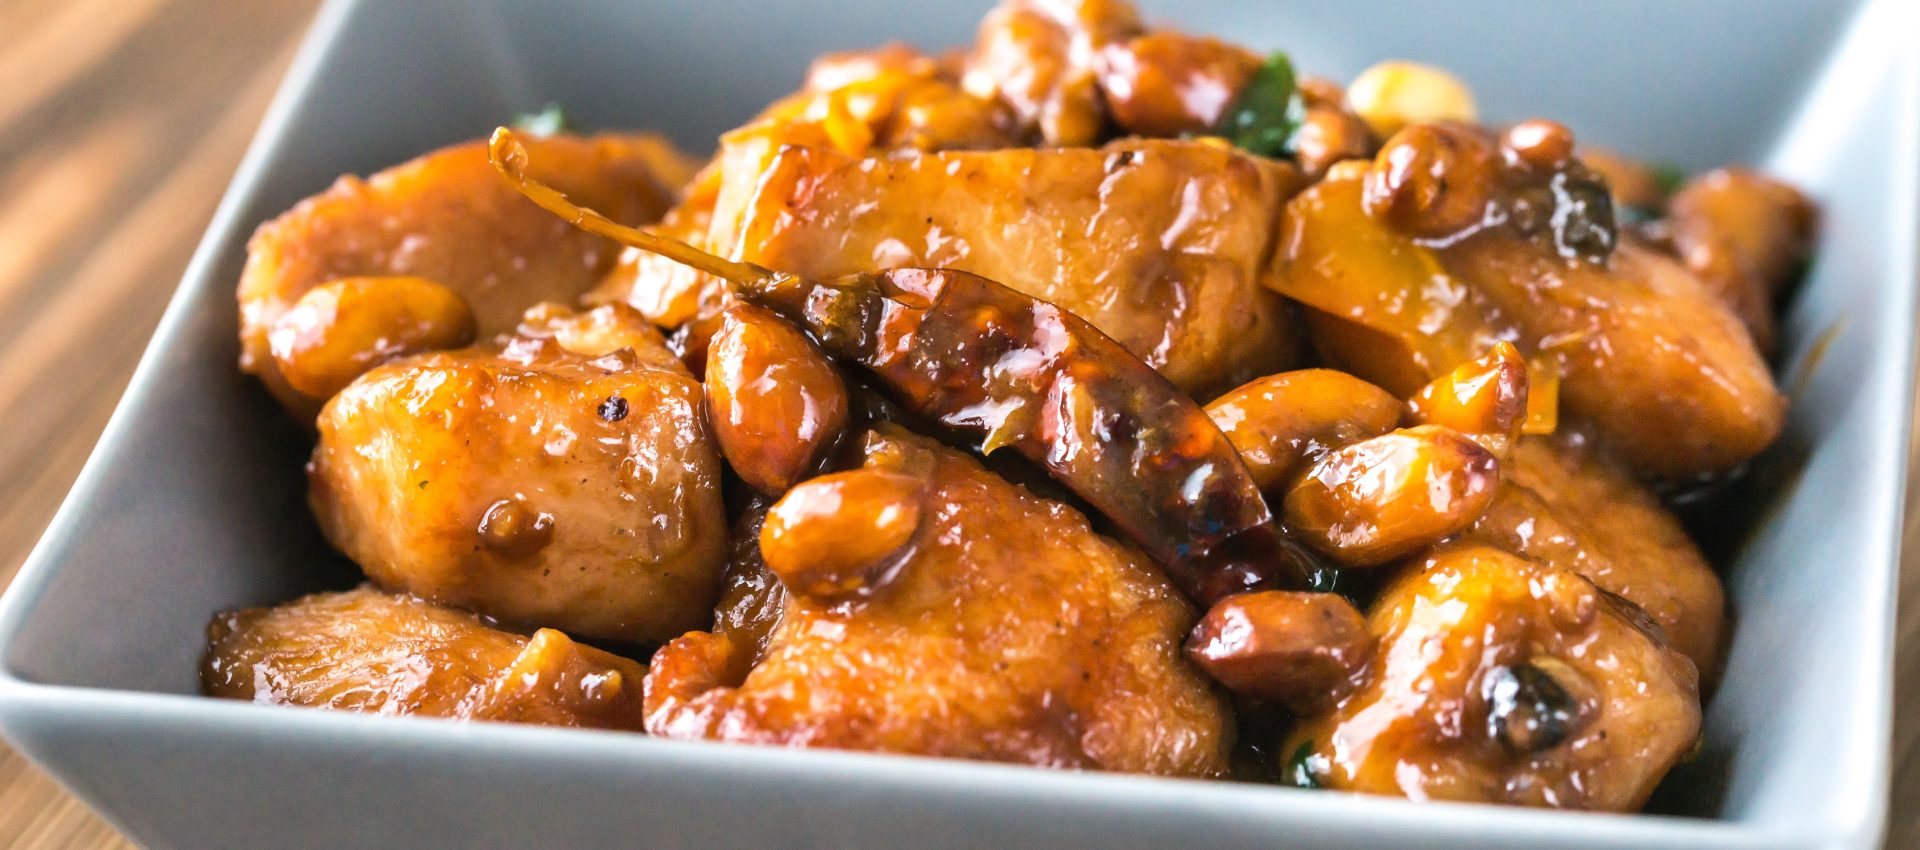 poulet Kung Pao au cookeo